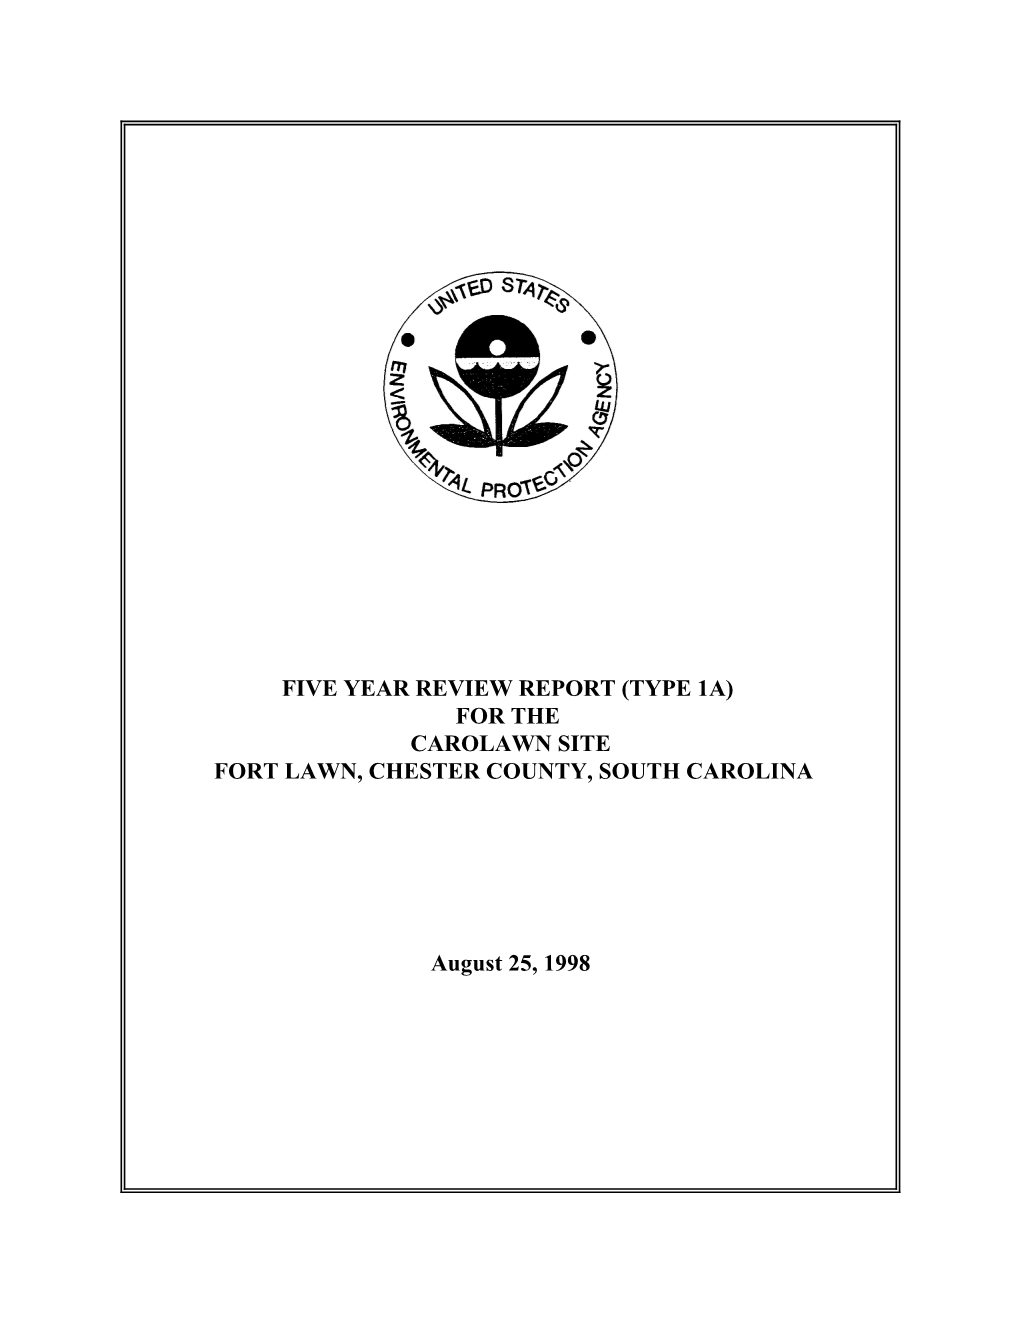 Five Year Review Report (Type 1A) for the Carolawn Site Fort Lawn, Chester County, South Carolina